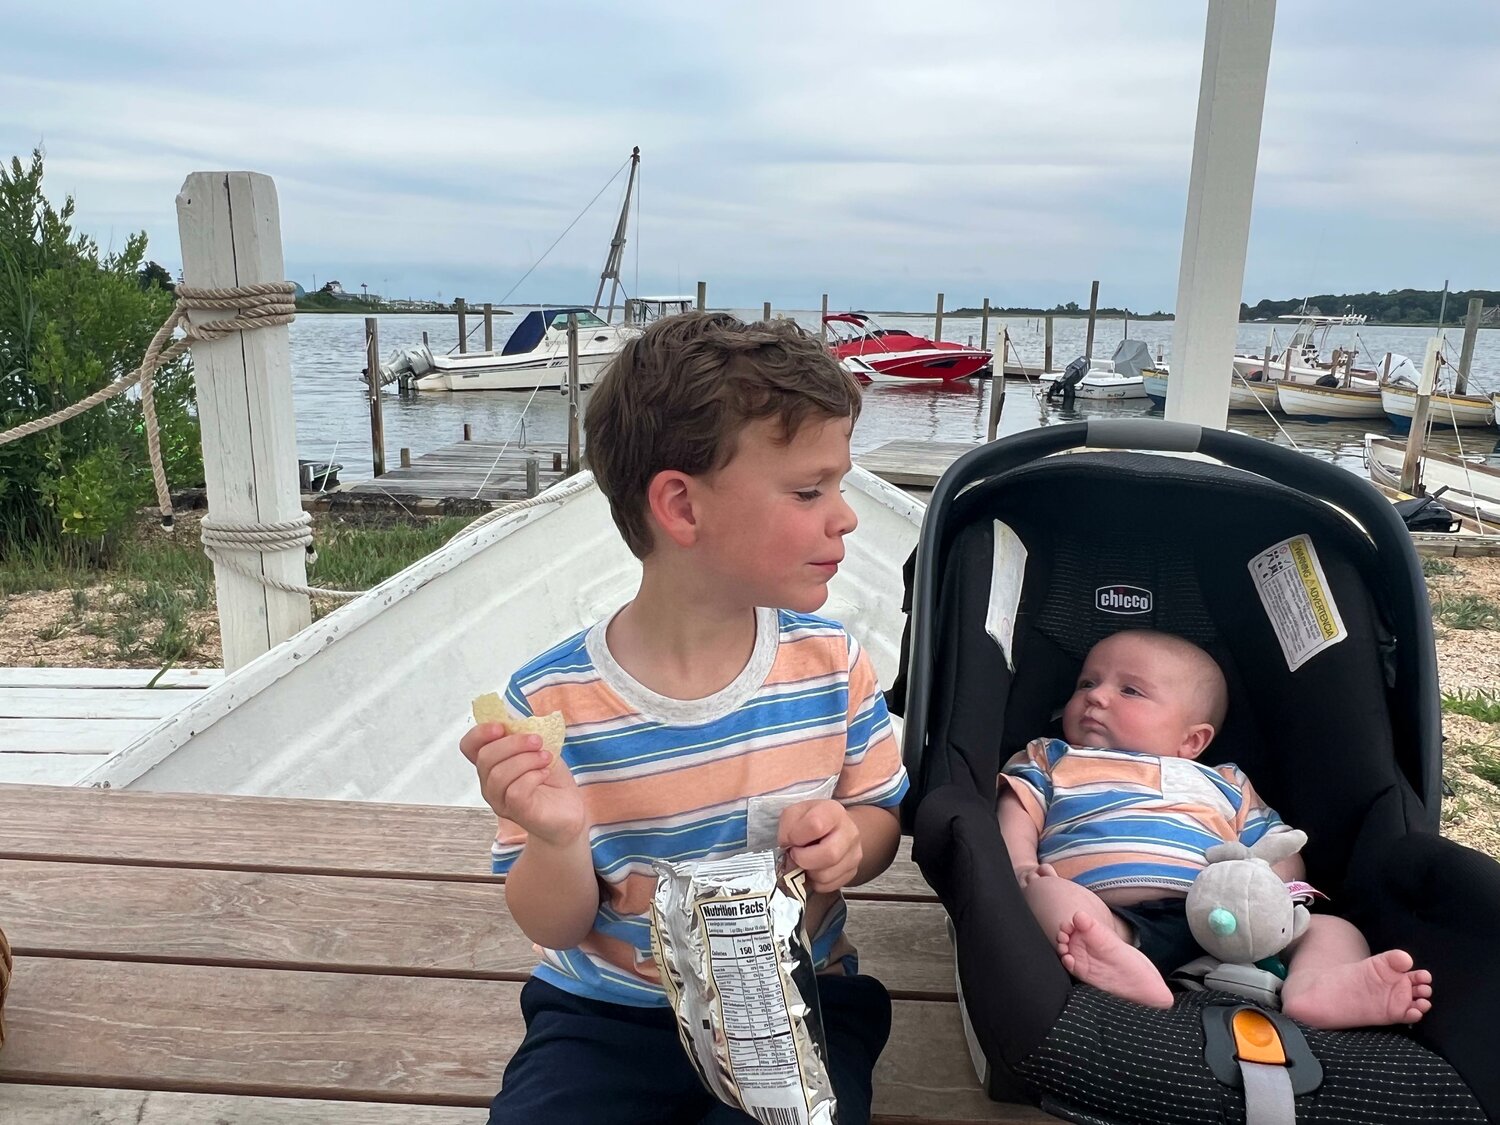 Harry (age 4) and Tommy (3 months) of Center Moriches enjoyed their first summer as brothers, with many nights of fun and chips down at Silly Lily!